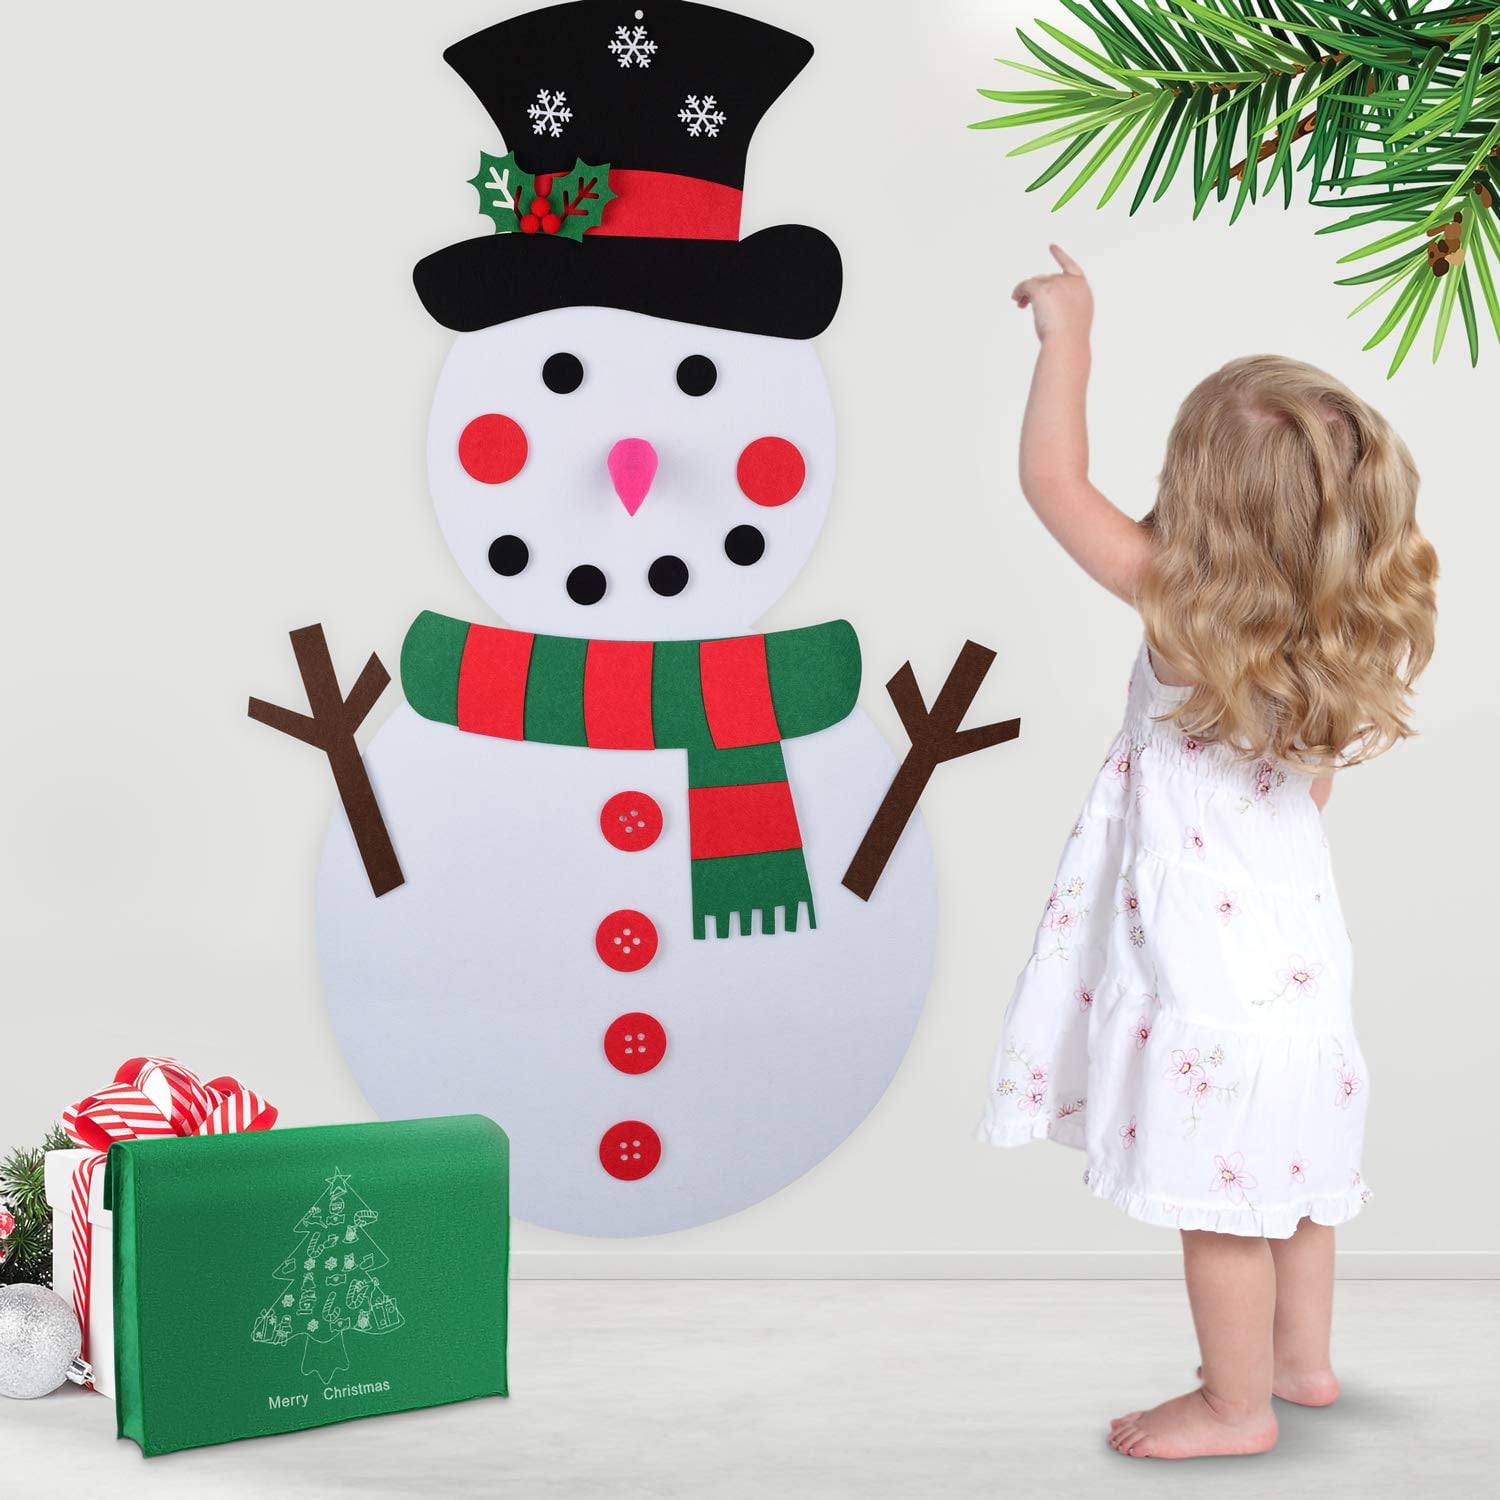 Kids Gifts Diy Felt Snowman Detachable Xmas Ornament Wall Hanging Games For  Christmas Decorationsred Green Scarf